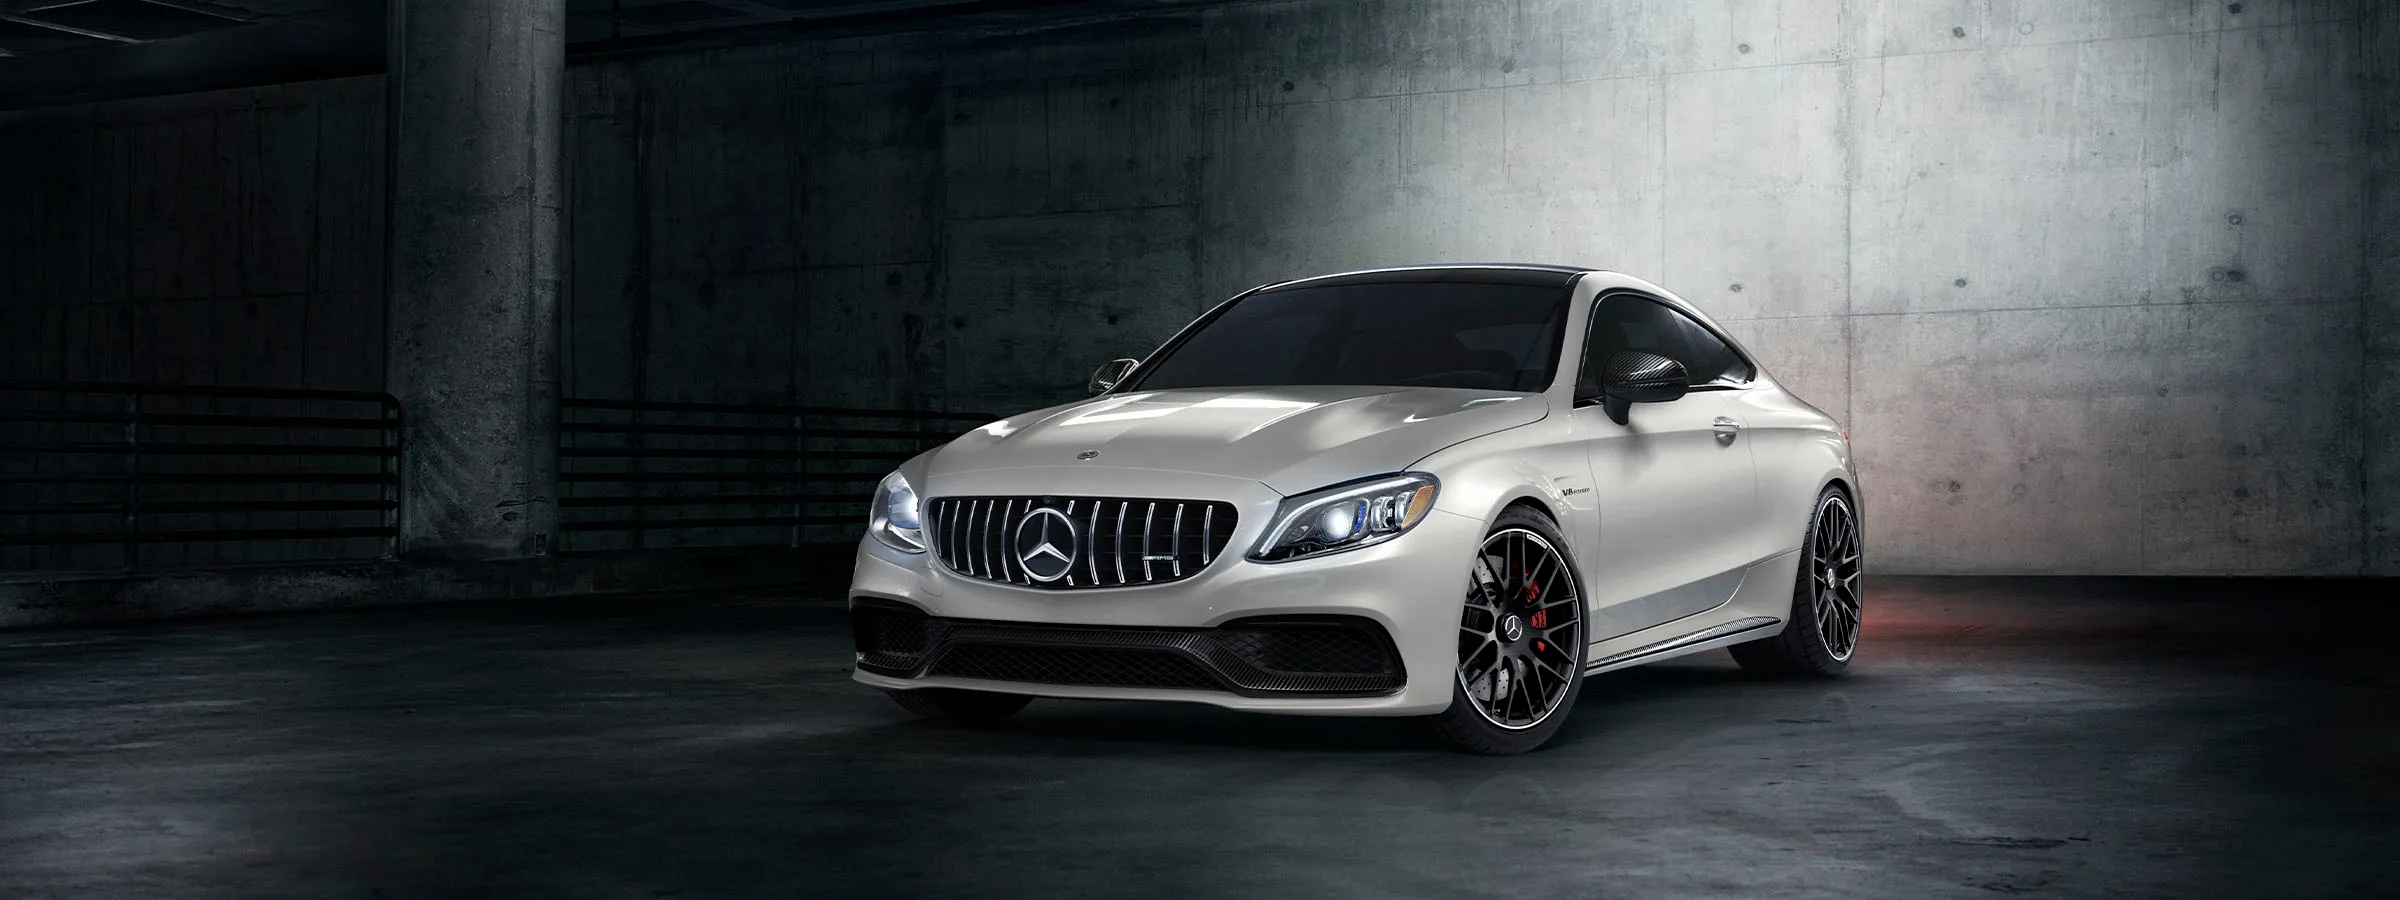 The Compact Amg C Class Coupe Mercedes Benz Usa